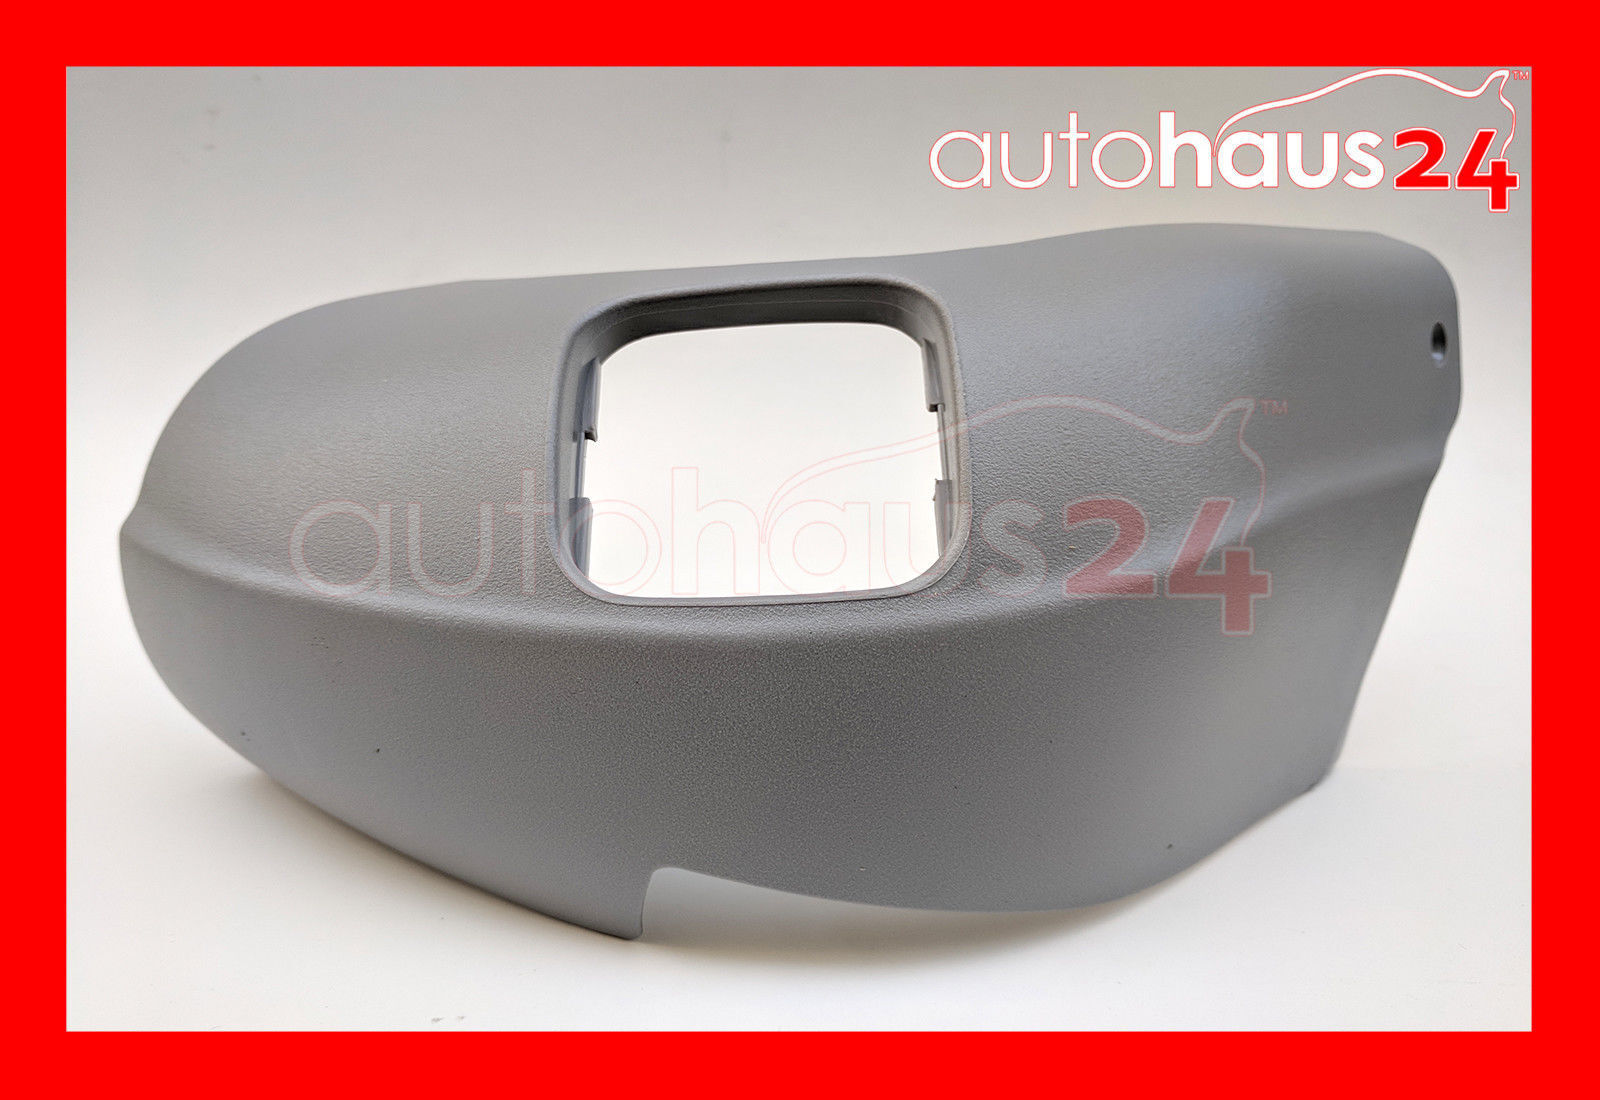 MERCEDES BENZ W220 S CLASS S600 S430 00-02 DRIVER SEAT LEFT SIDE TRIM COVER GRAY